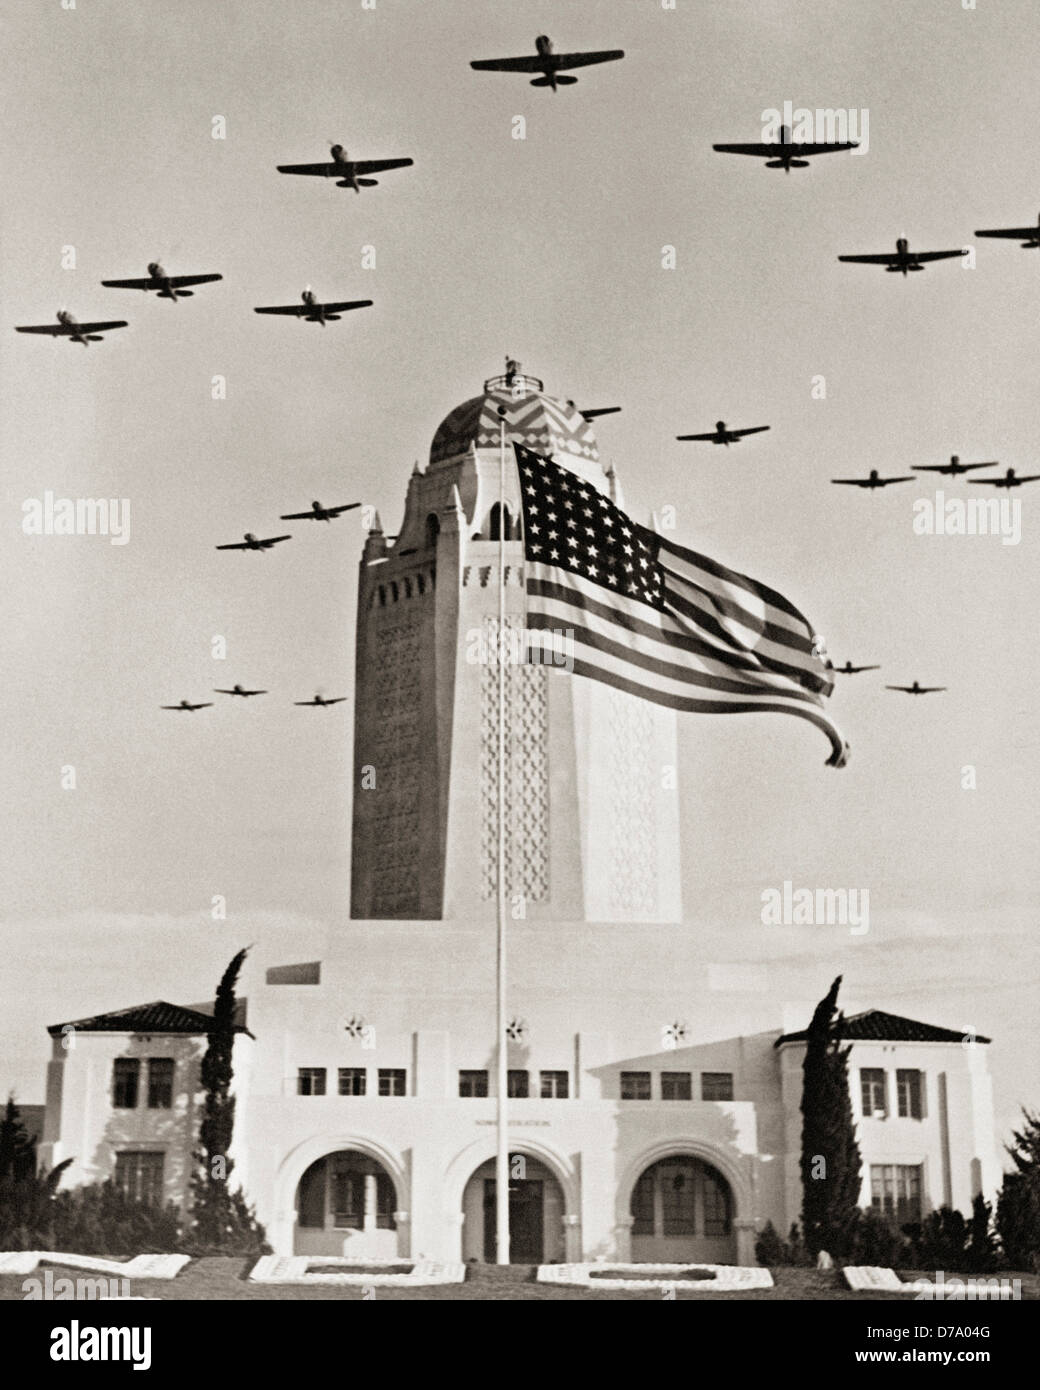 Fighter Planes Over Administration Building Flag Stock Photo